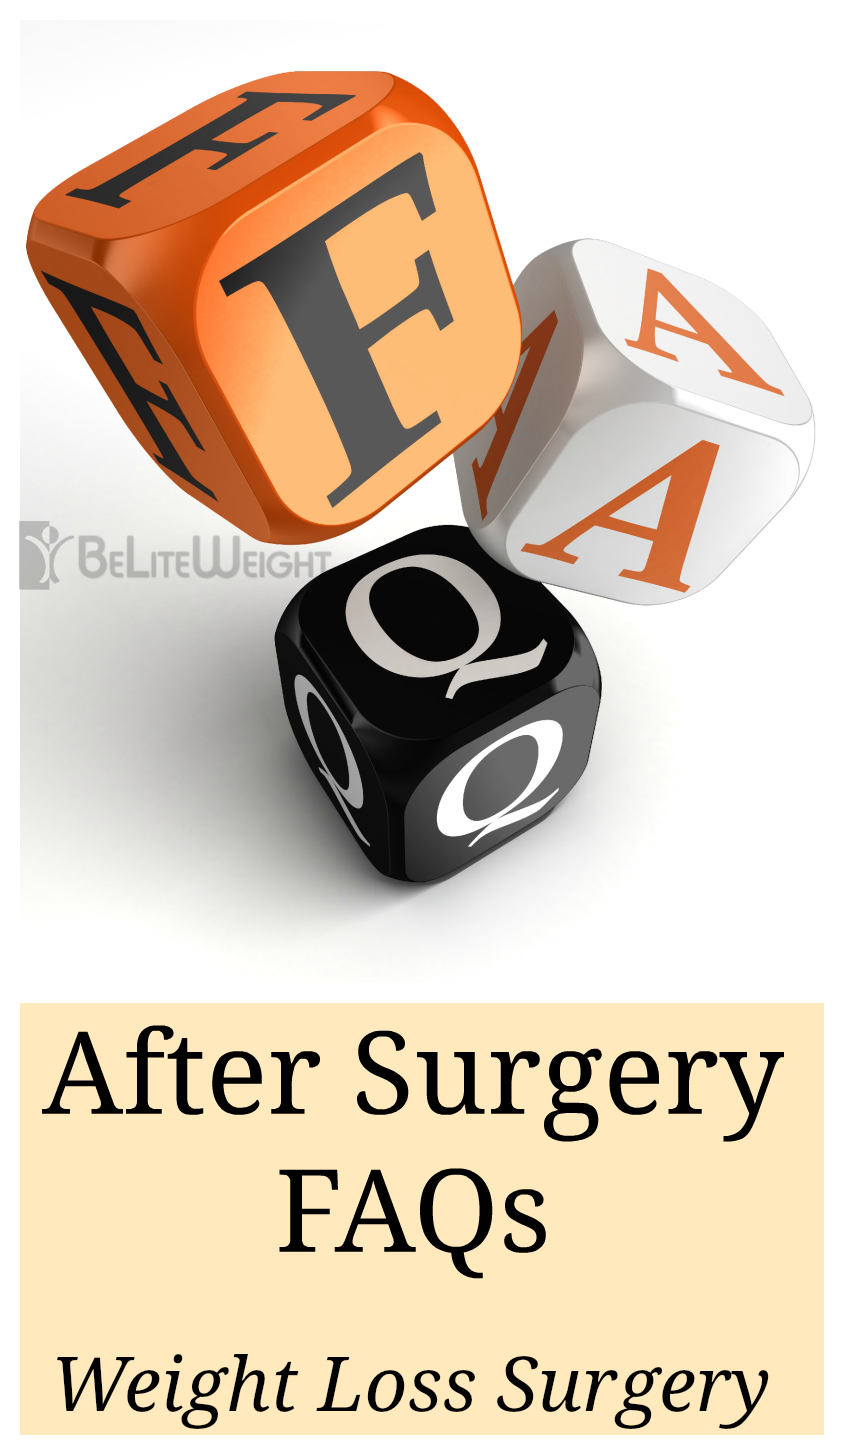 After Weight Loss Surgery FAQs